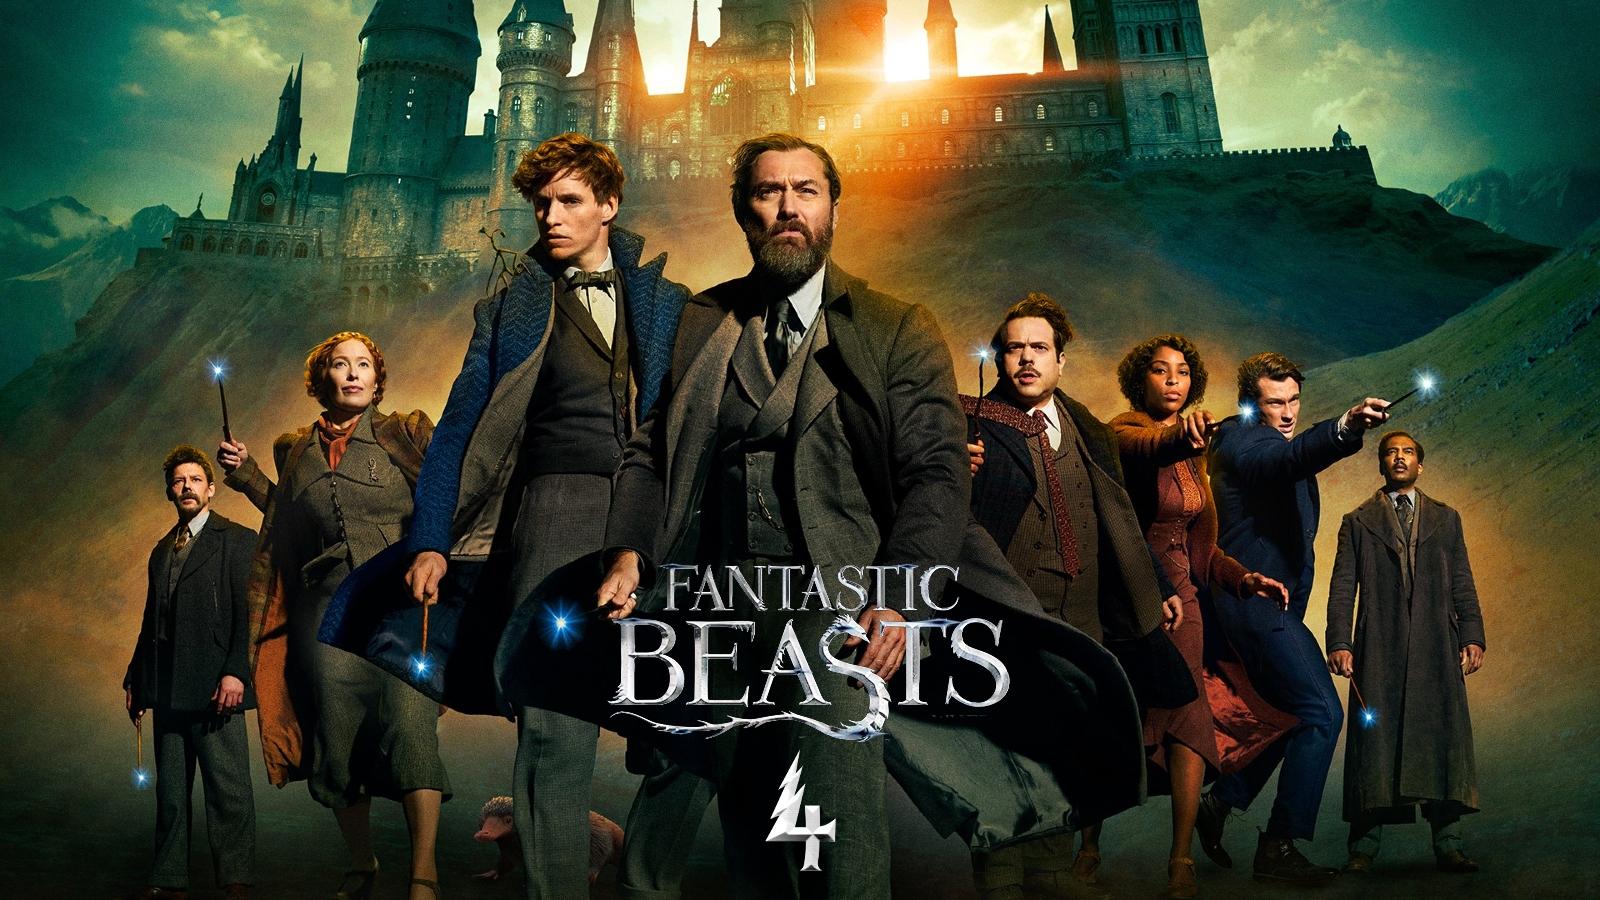 Fantastic Beasts characters in front of Hogwarts with 'Fantastic Beasts 4' text